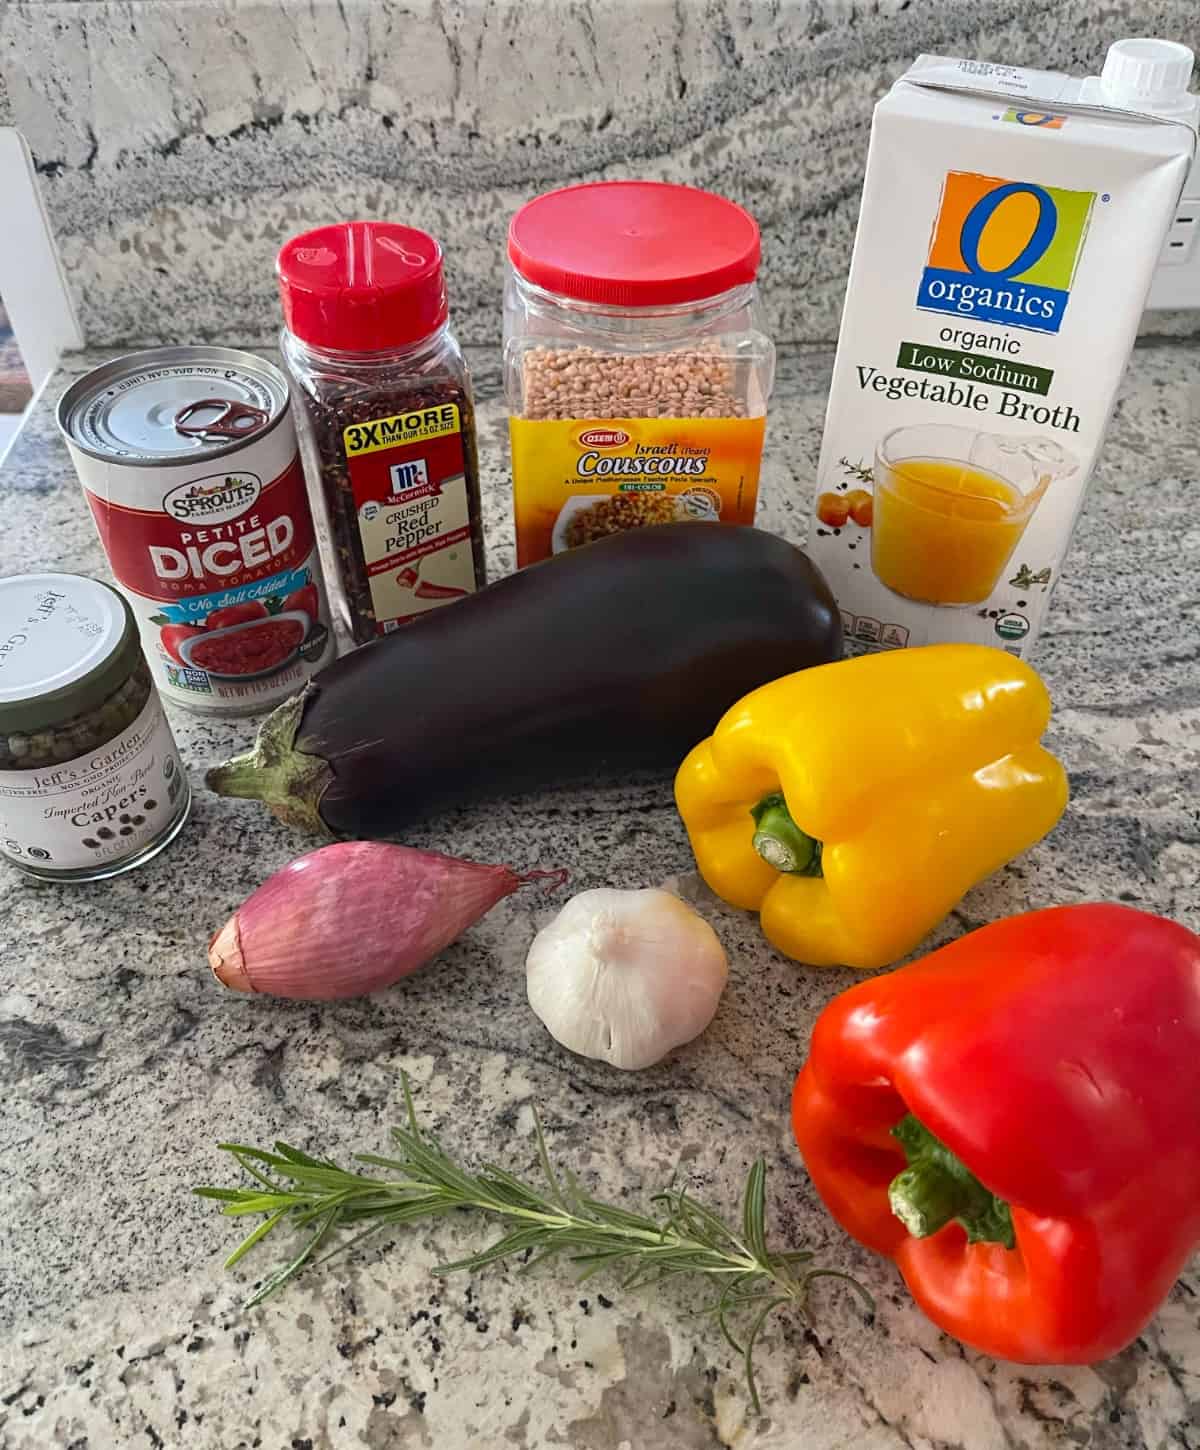 Ingredients including capers, canned diced tomatoes, crushed red pepper flakes, Israeli couscous, vegetable broth, eggplant, red and yellow bell peppers, garlic, shallot and sprig of rosemary.